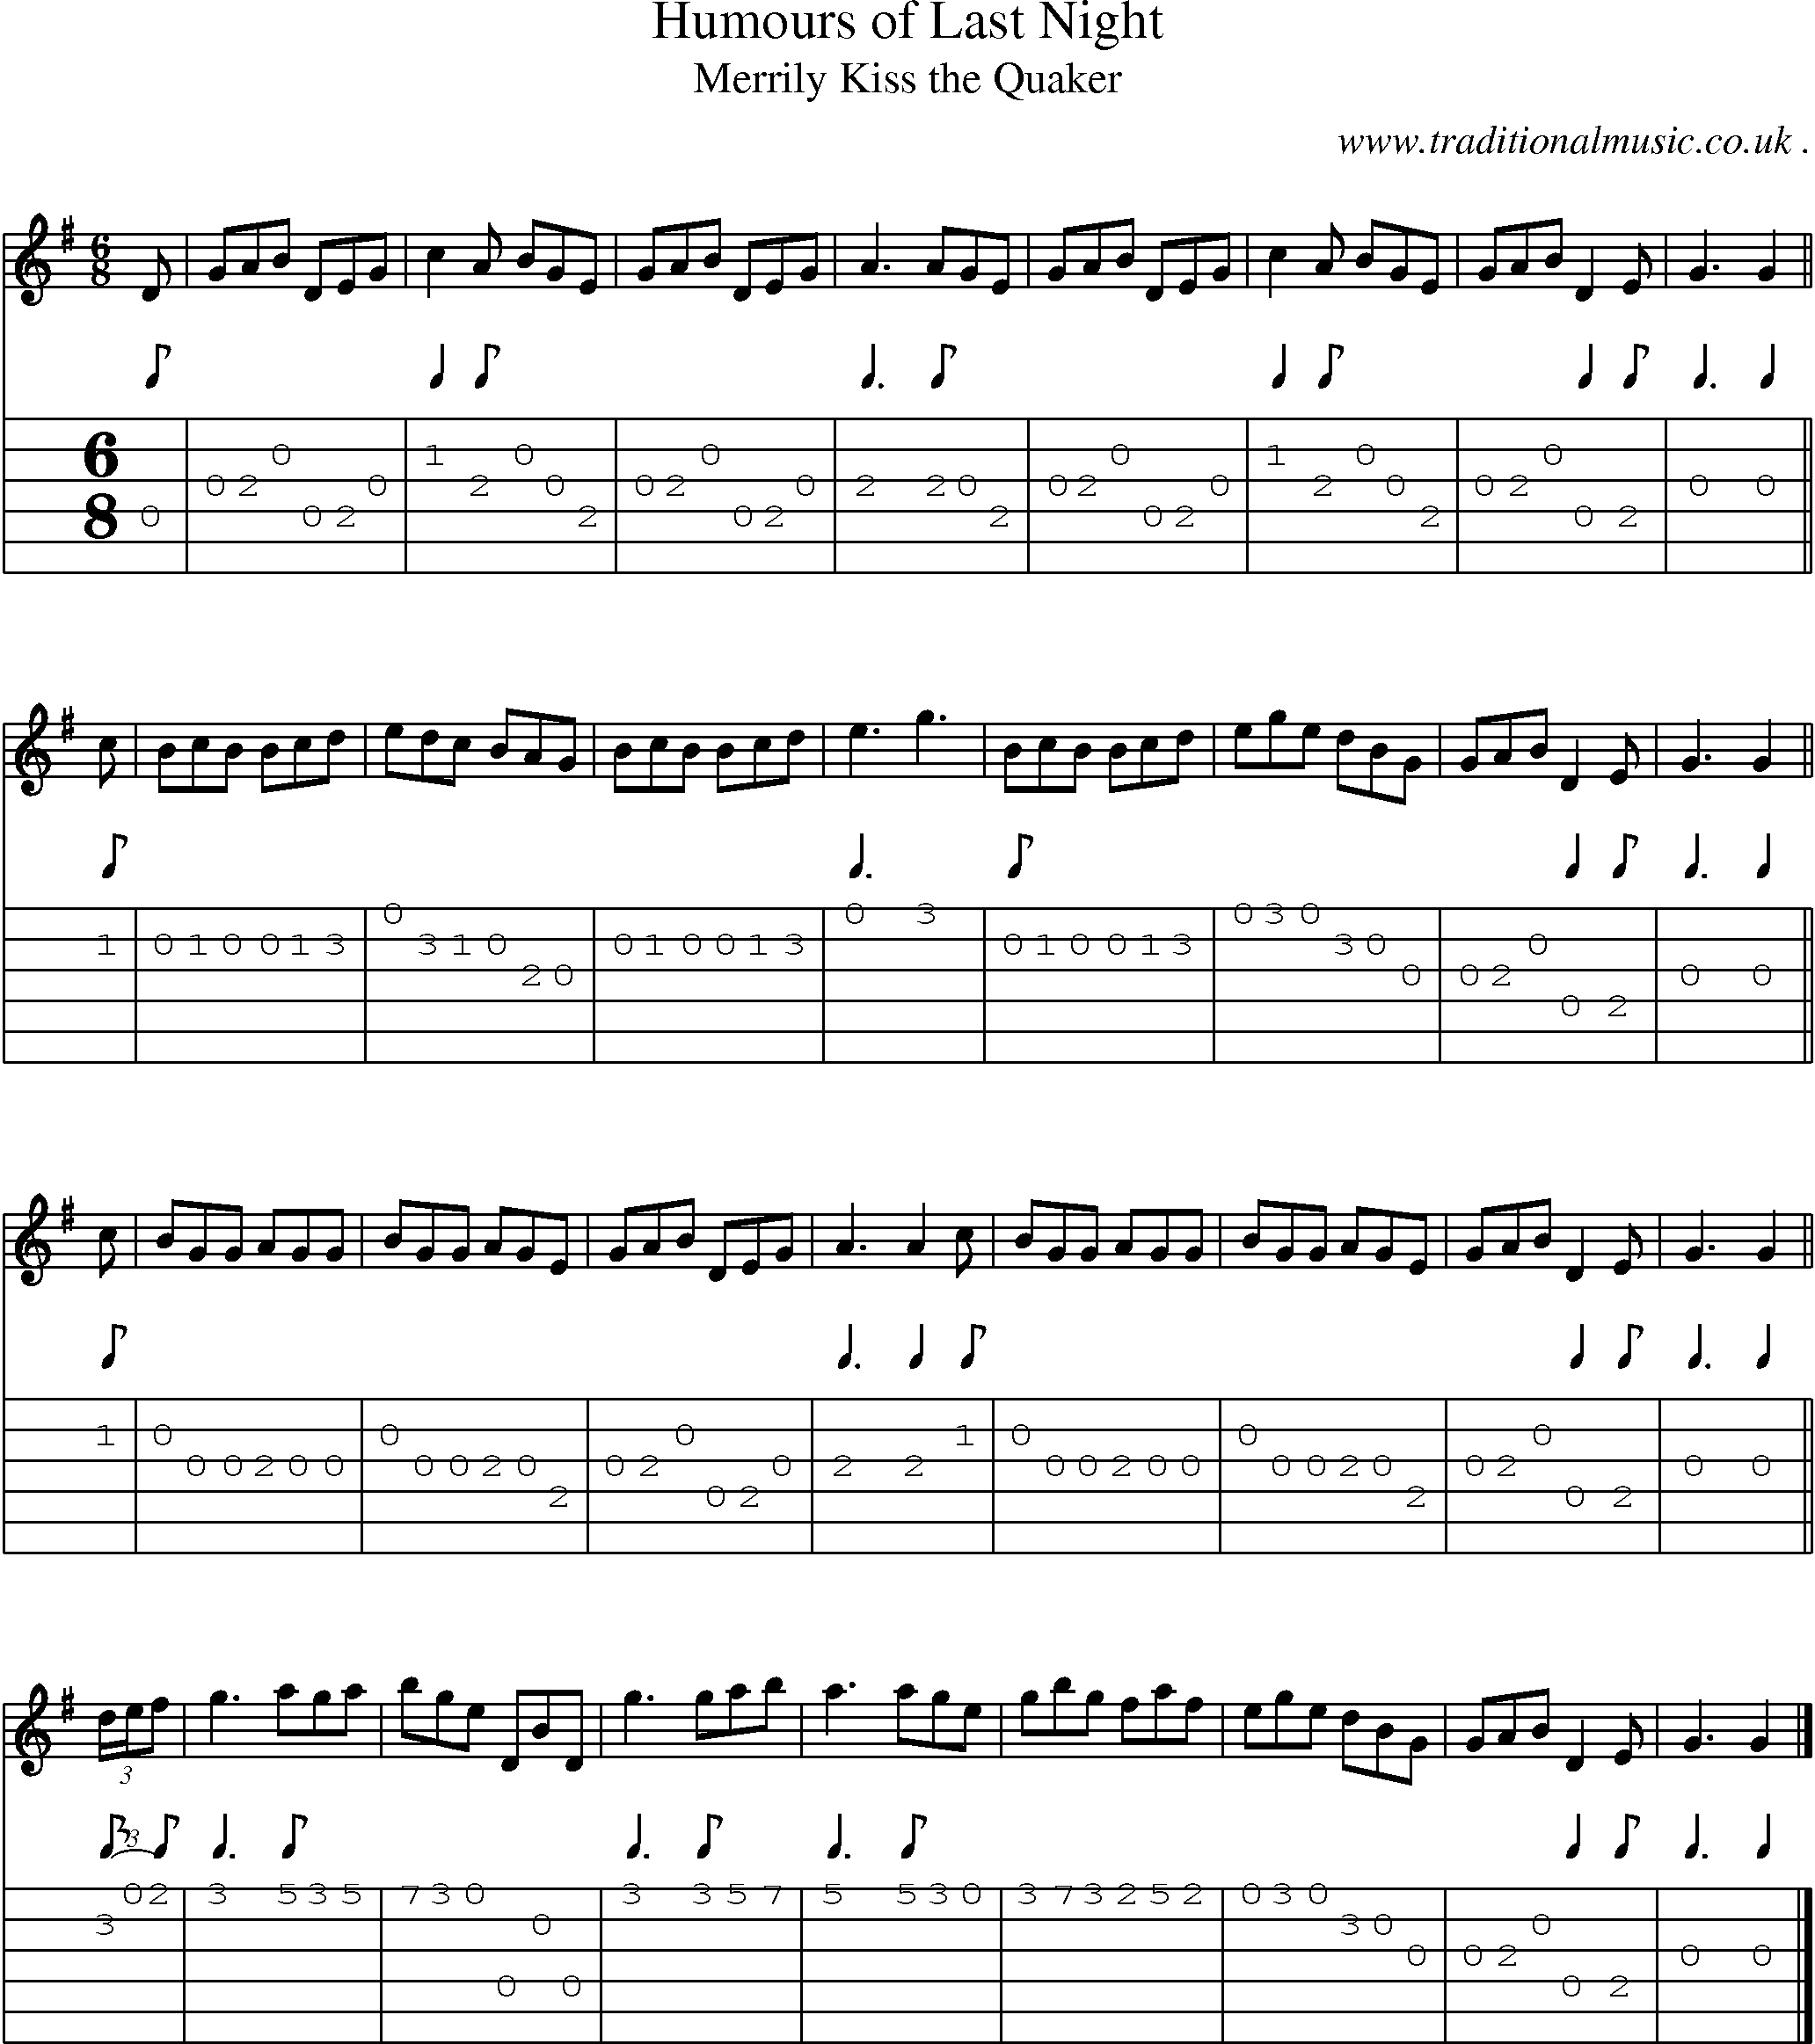 Sheet-music  score, Chords and Guitar Tabs for Humours Of Last Night